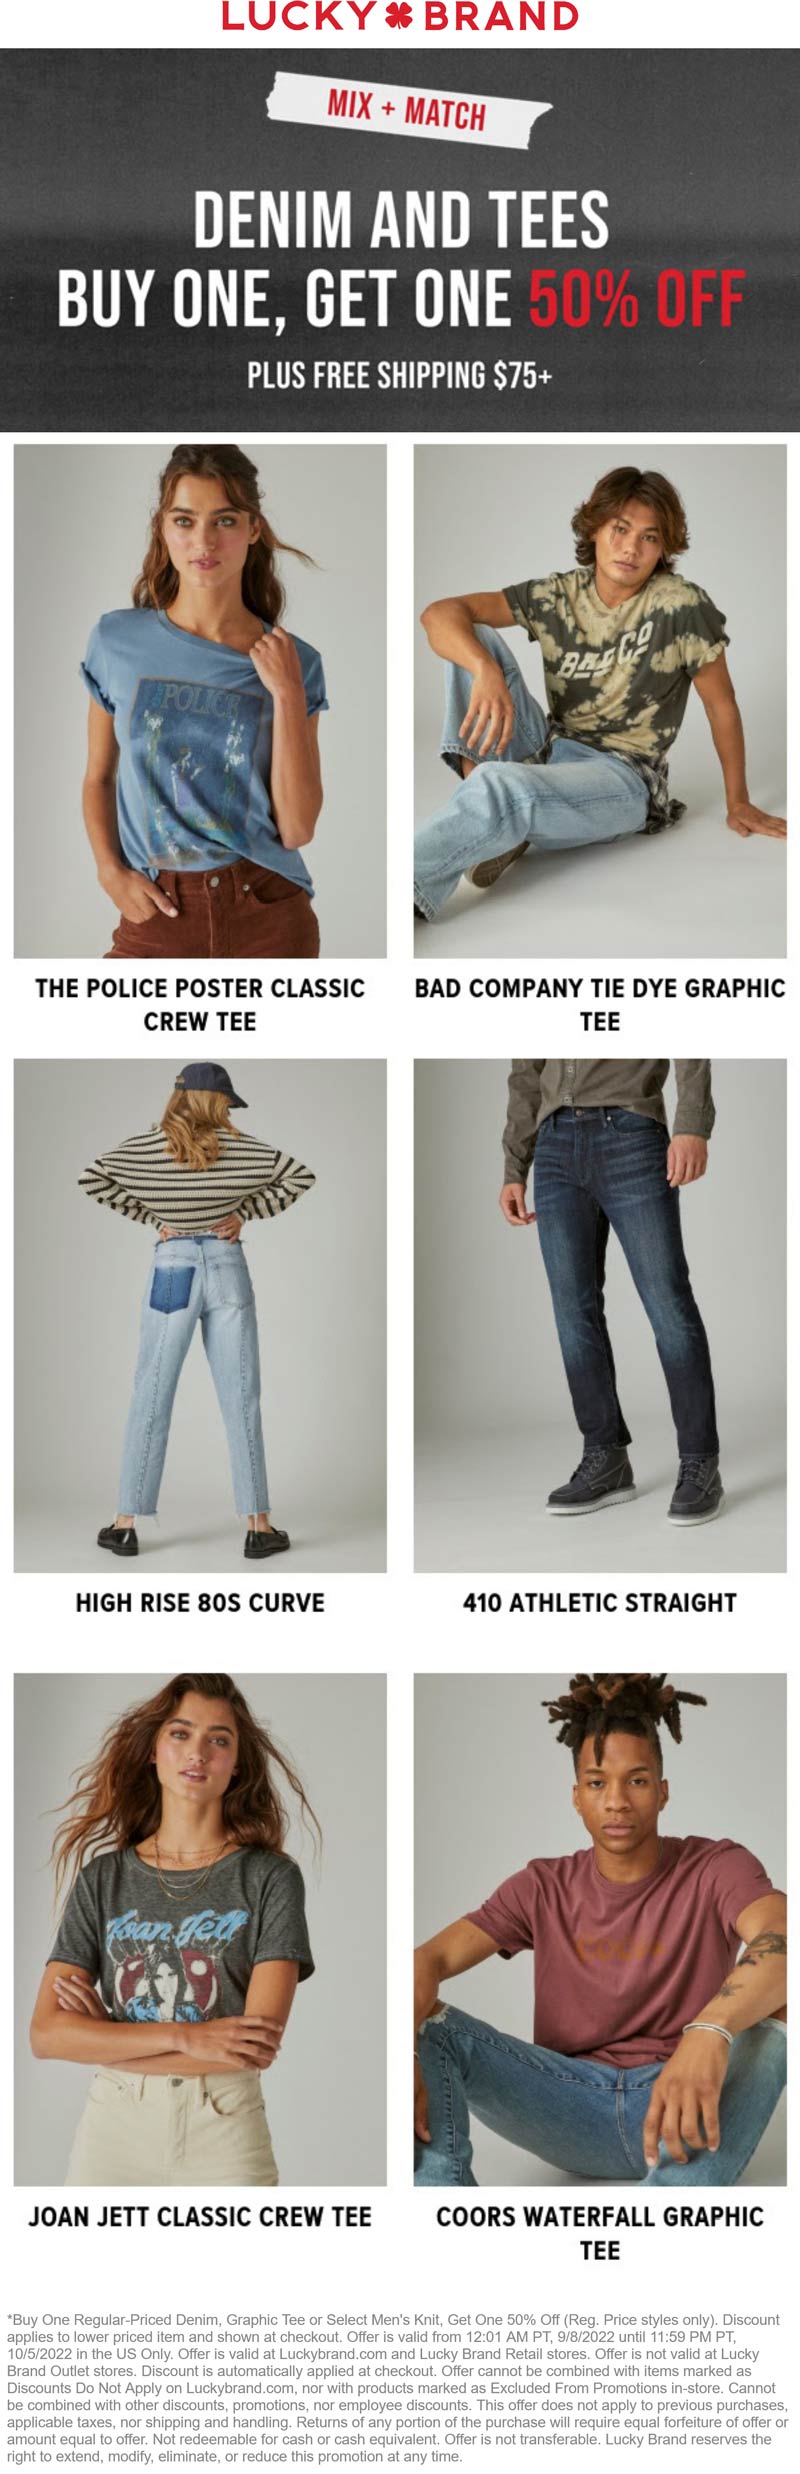 Lucky Brand stores Coupon  Second denim or tee 50% off at Lucky Brand, ditto online #luckybrand 